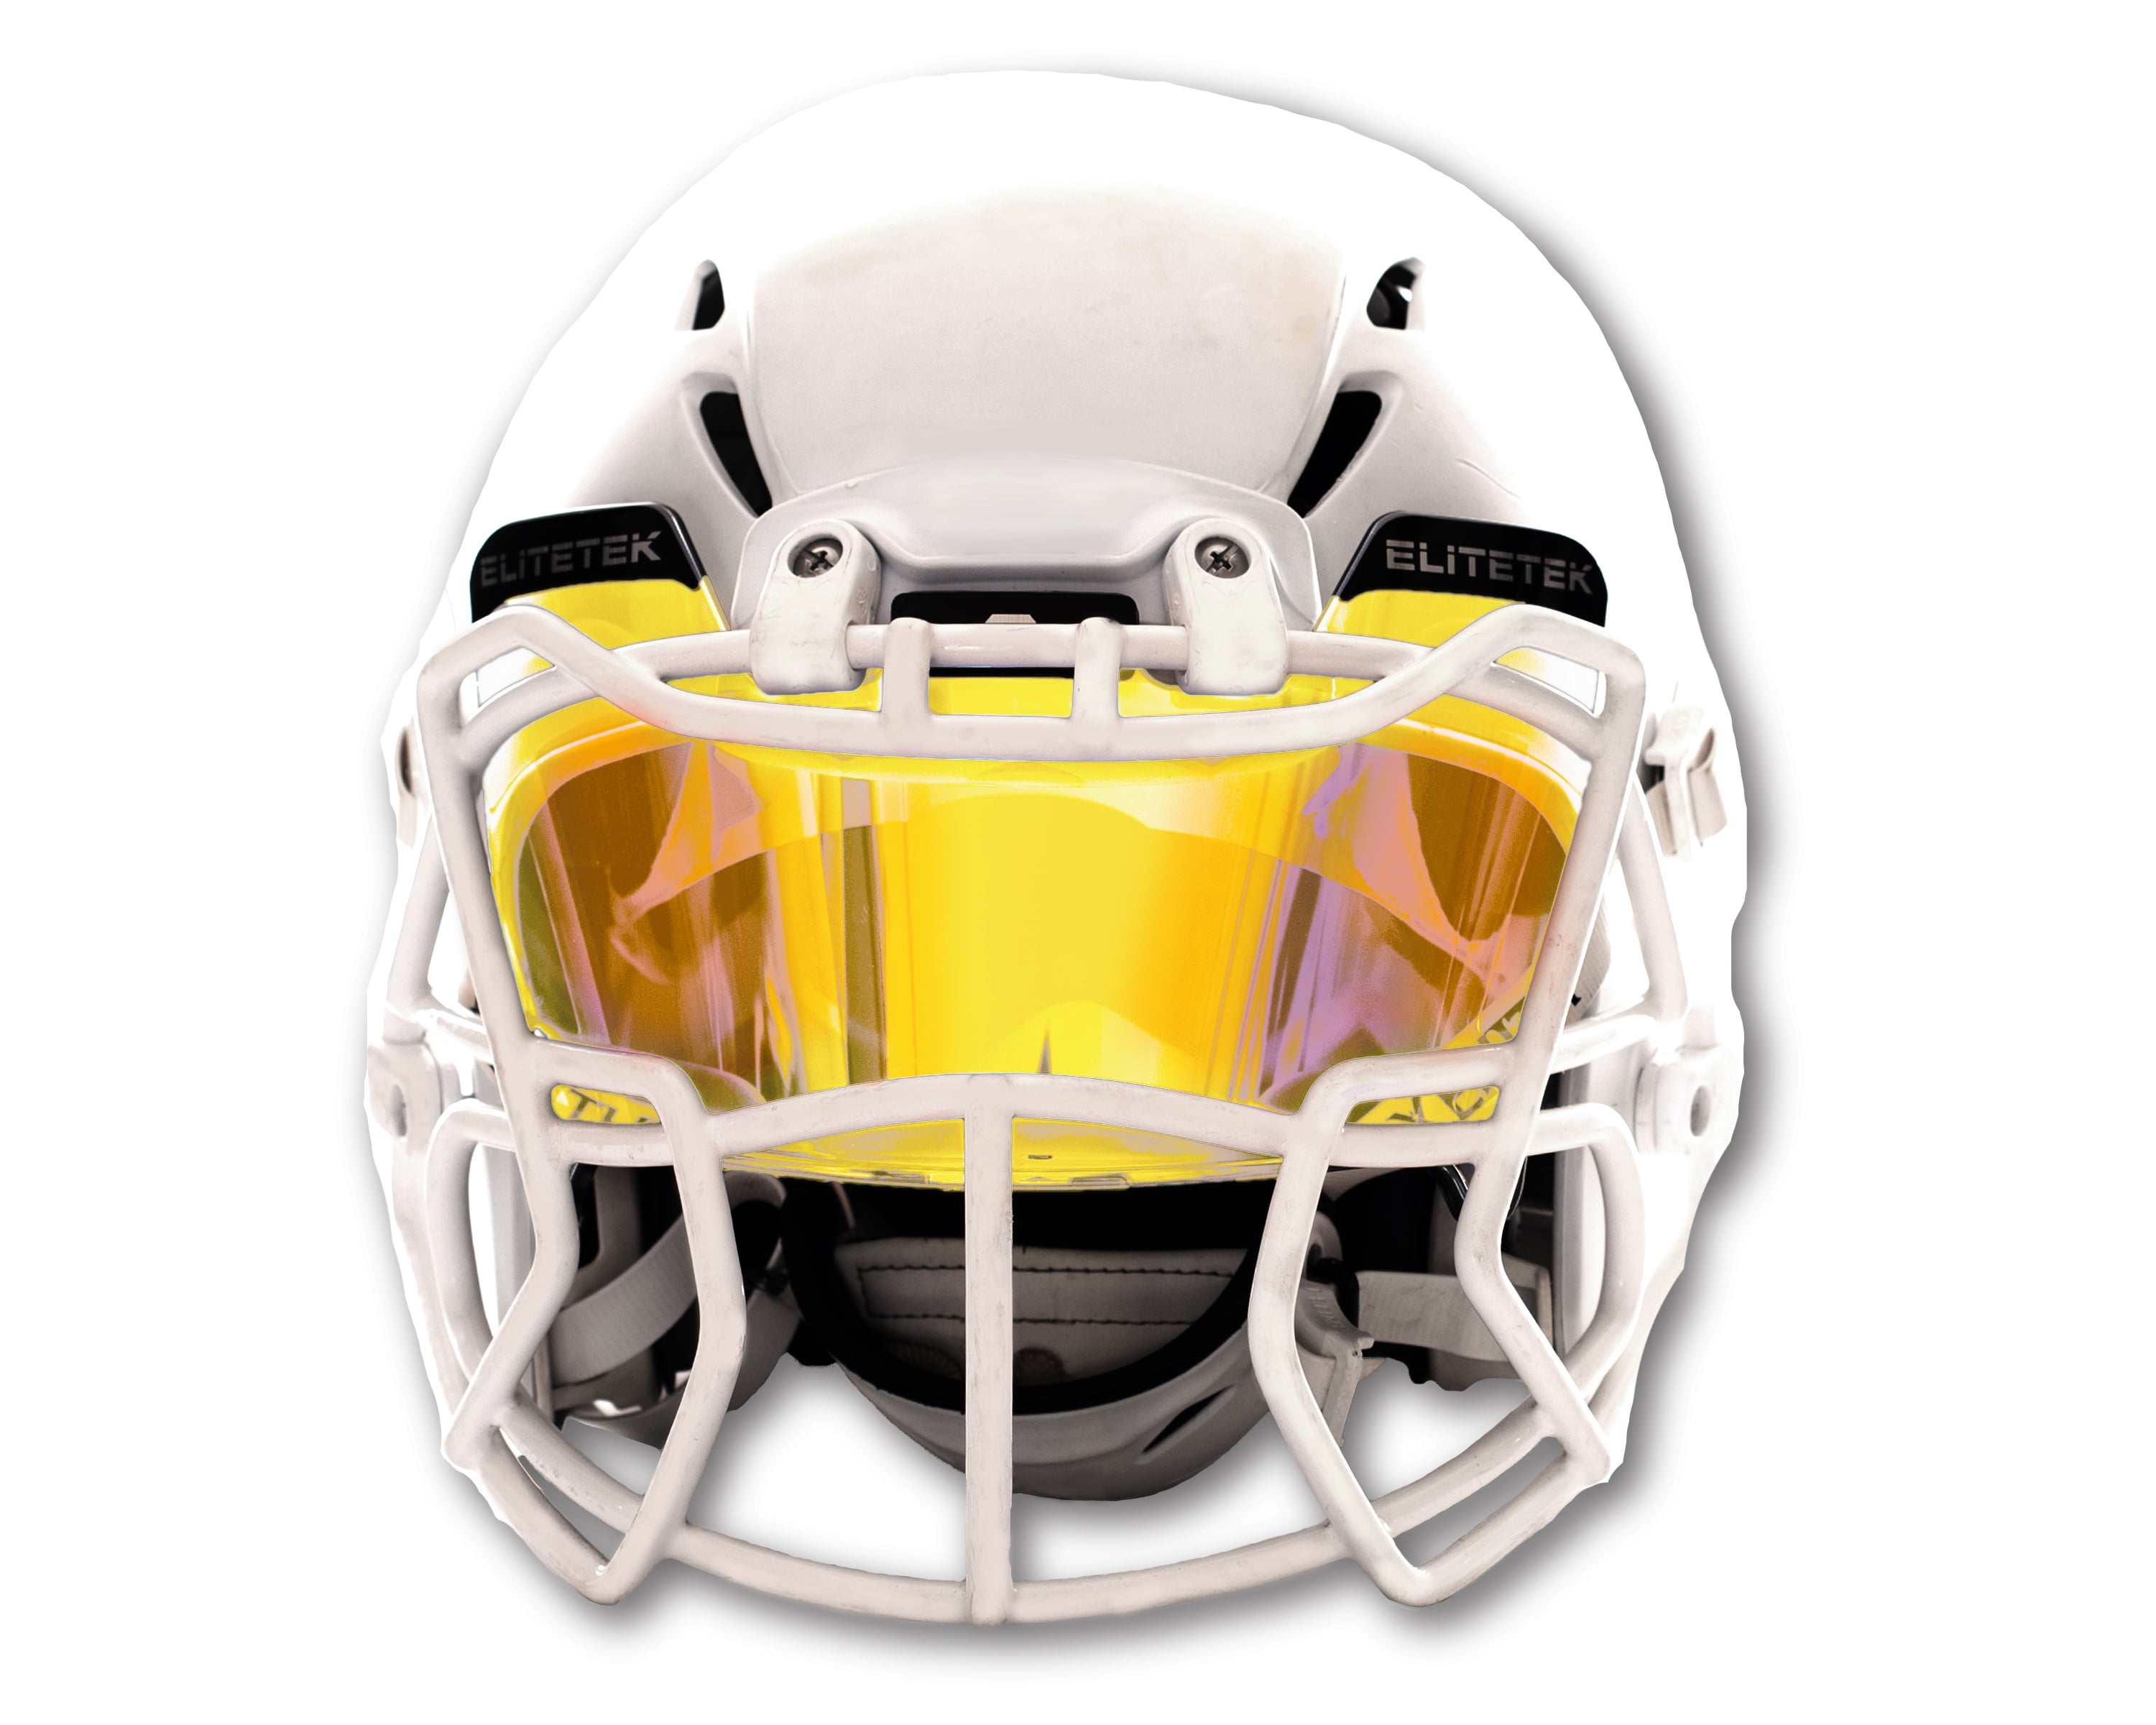 Universal Fit for Riddell Xenith Vicis and other Popular brand Helmets Accessories Hats & Caps Helmets Sports Helmets Anti-Fog True Clear Football Visor Quick release clips included. 